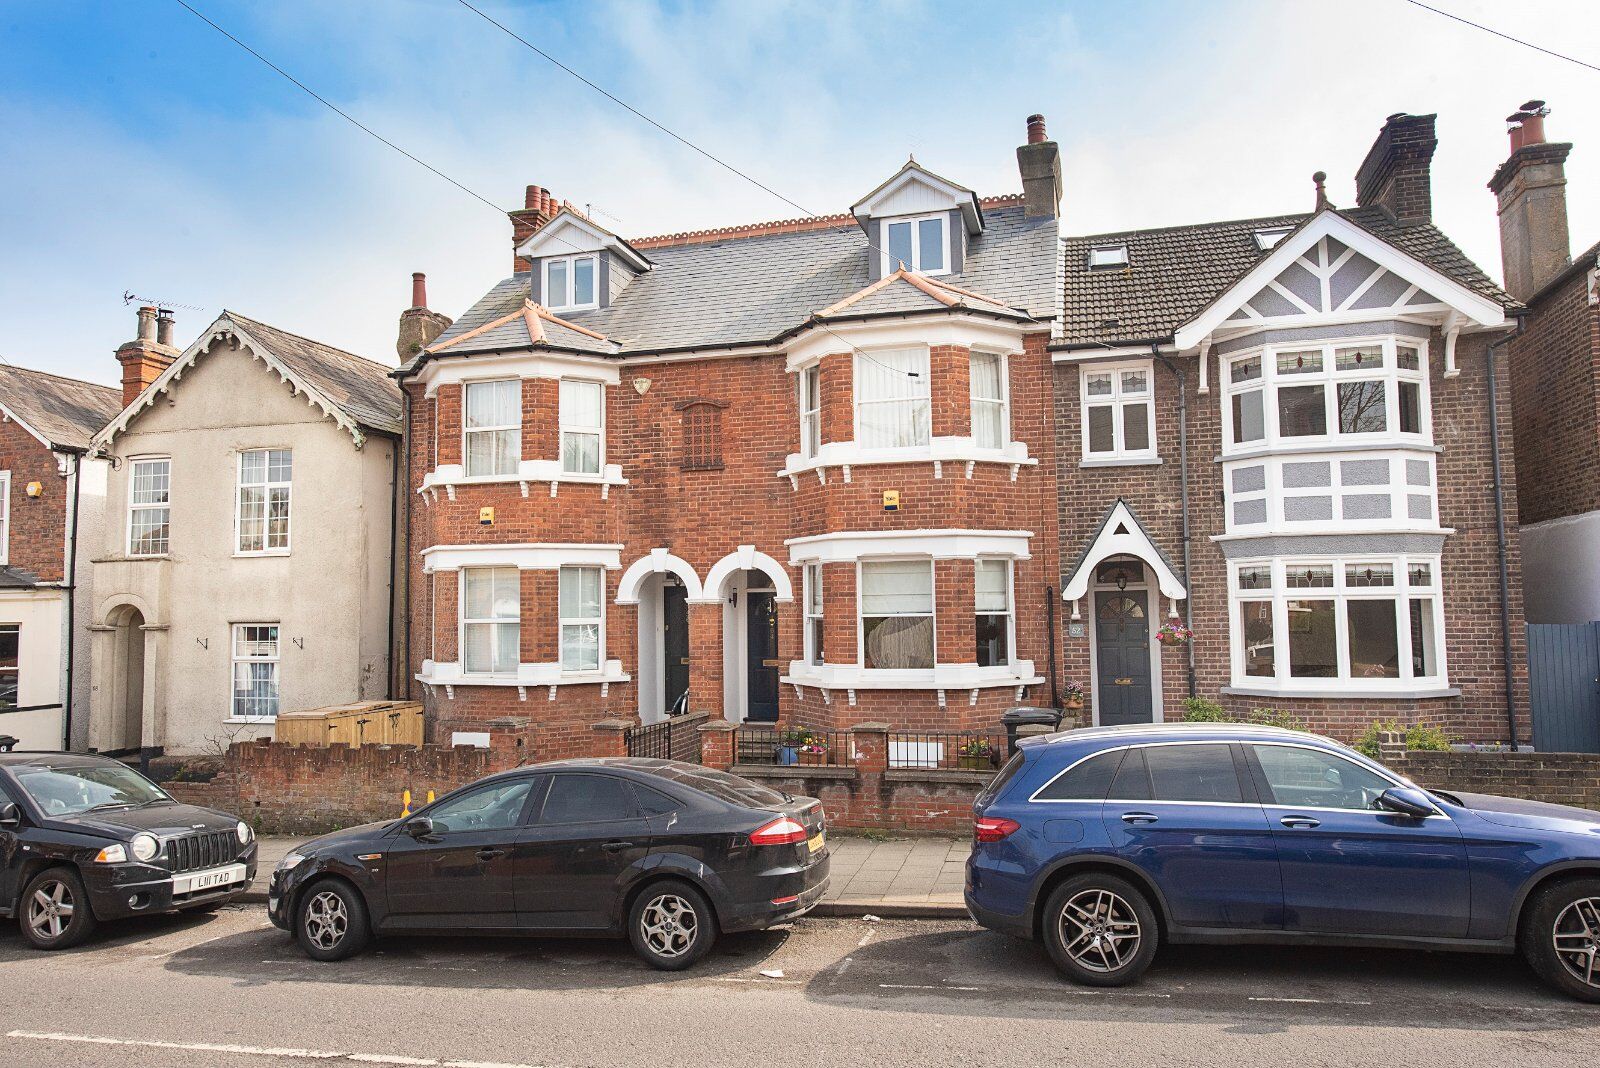 4 bedroom mid terraced house for sale Stanhope Road, St. Albans, AL1, main image